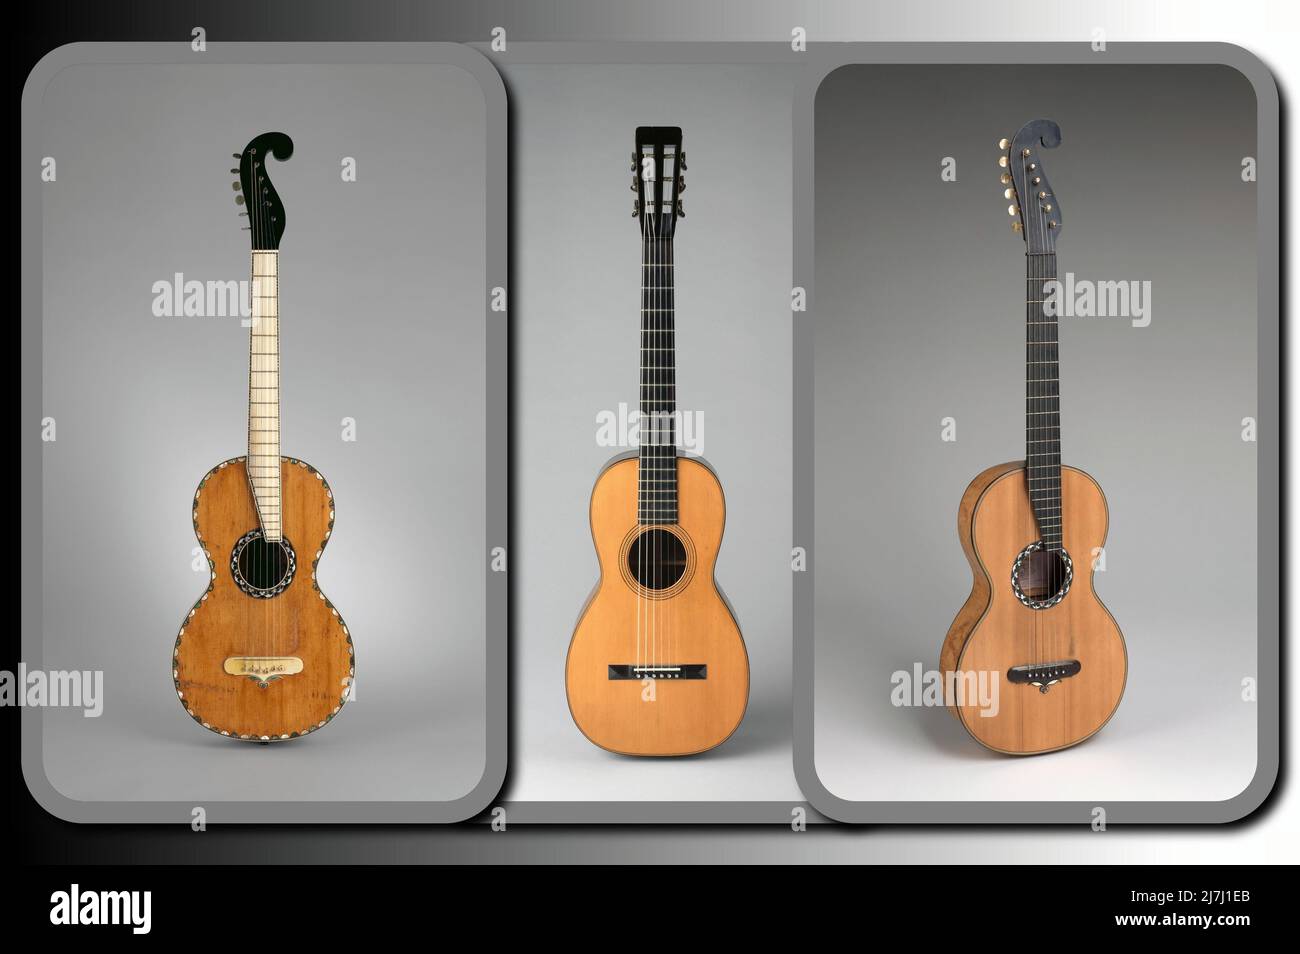 Some beautiful guitars by the well-known luthier Martin, produced at the end of the 19th century Stock Photo